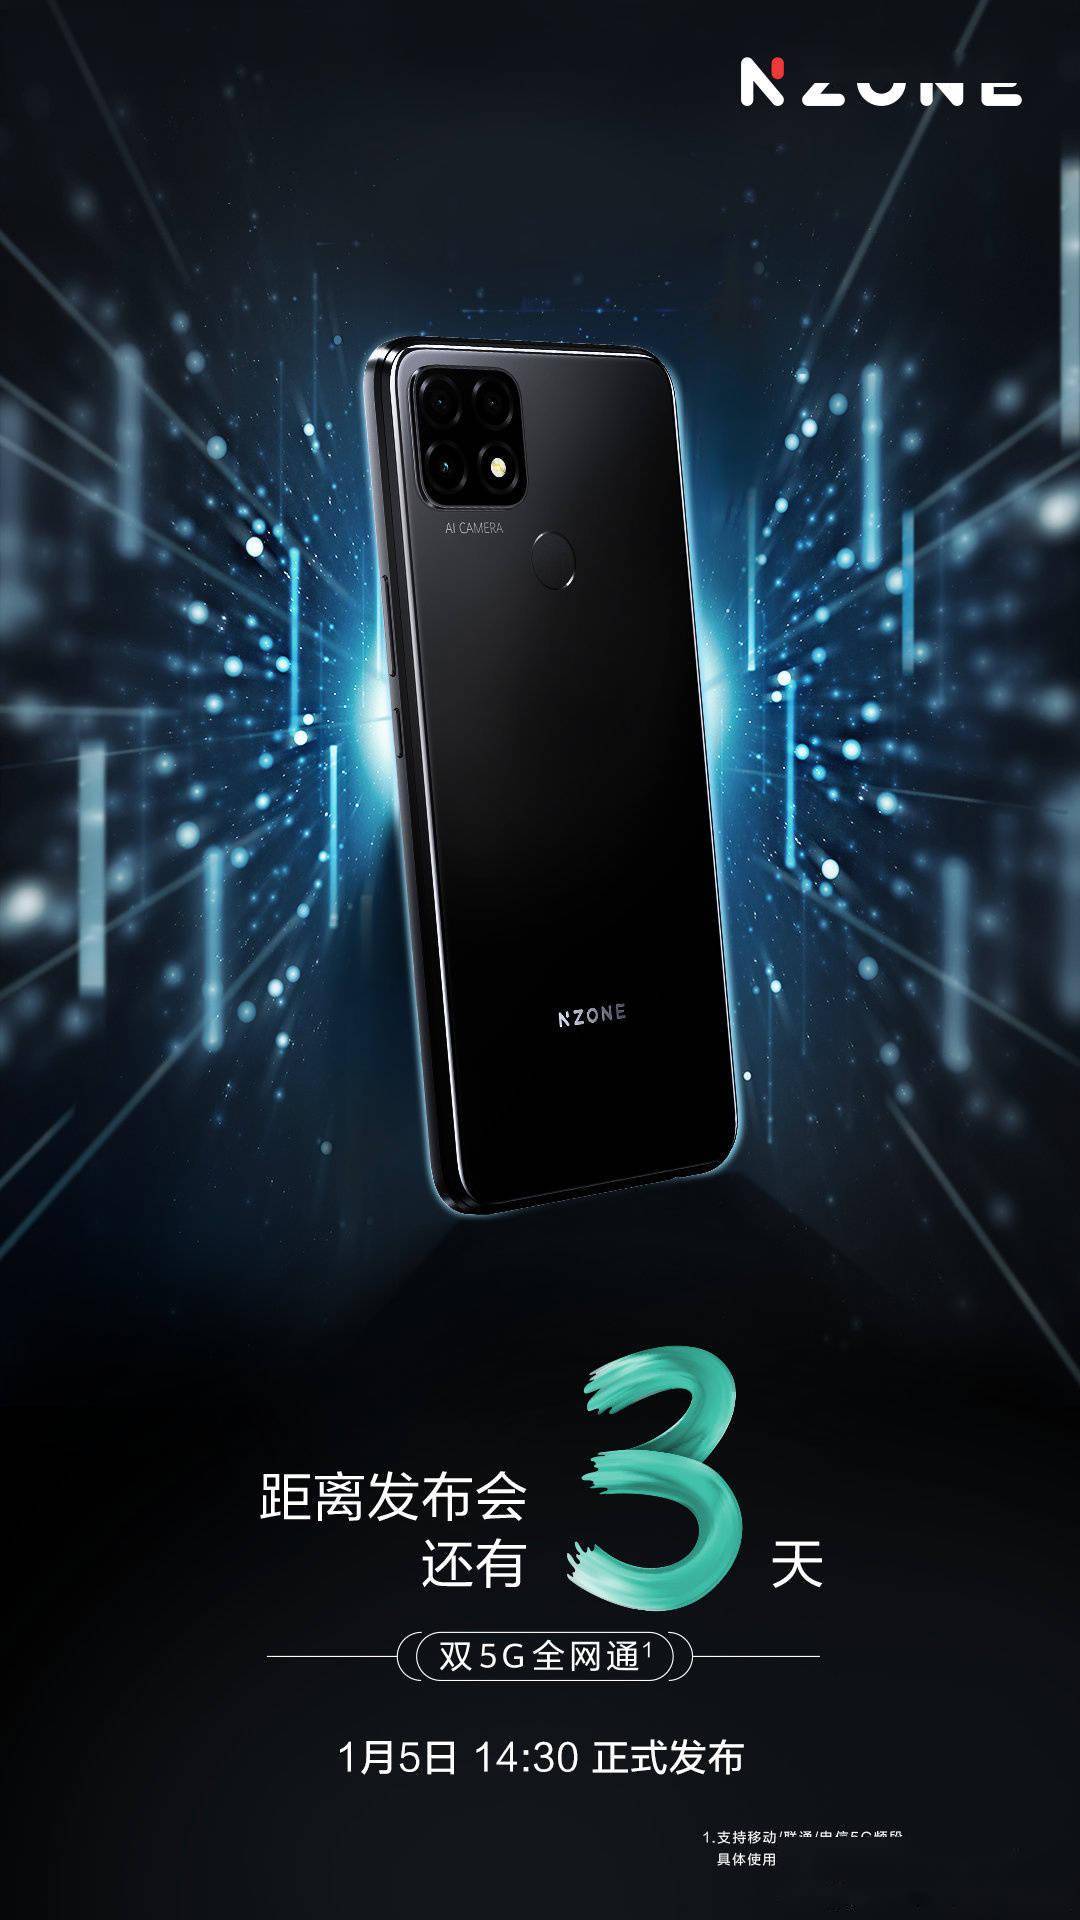 China Mobile's NZONE S7 series 5G mobile phones are officially announced on January 5th add/titleonlySoc add/titleonlySupport add/titleonlyPro | 068aa6b36c264840b1c5d13dbe2b2494